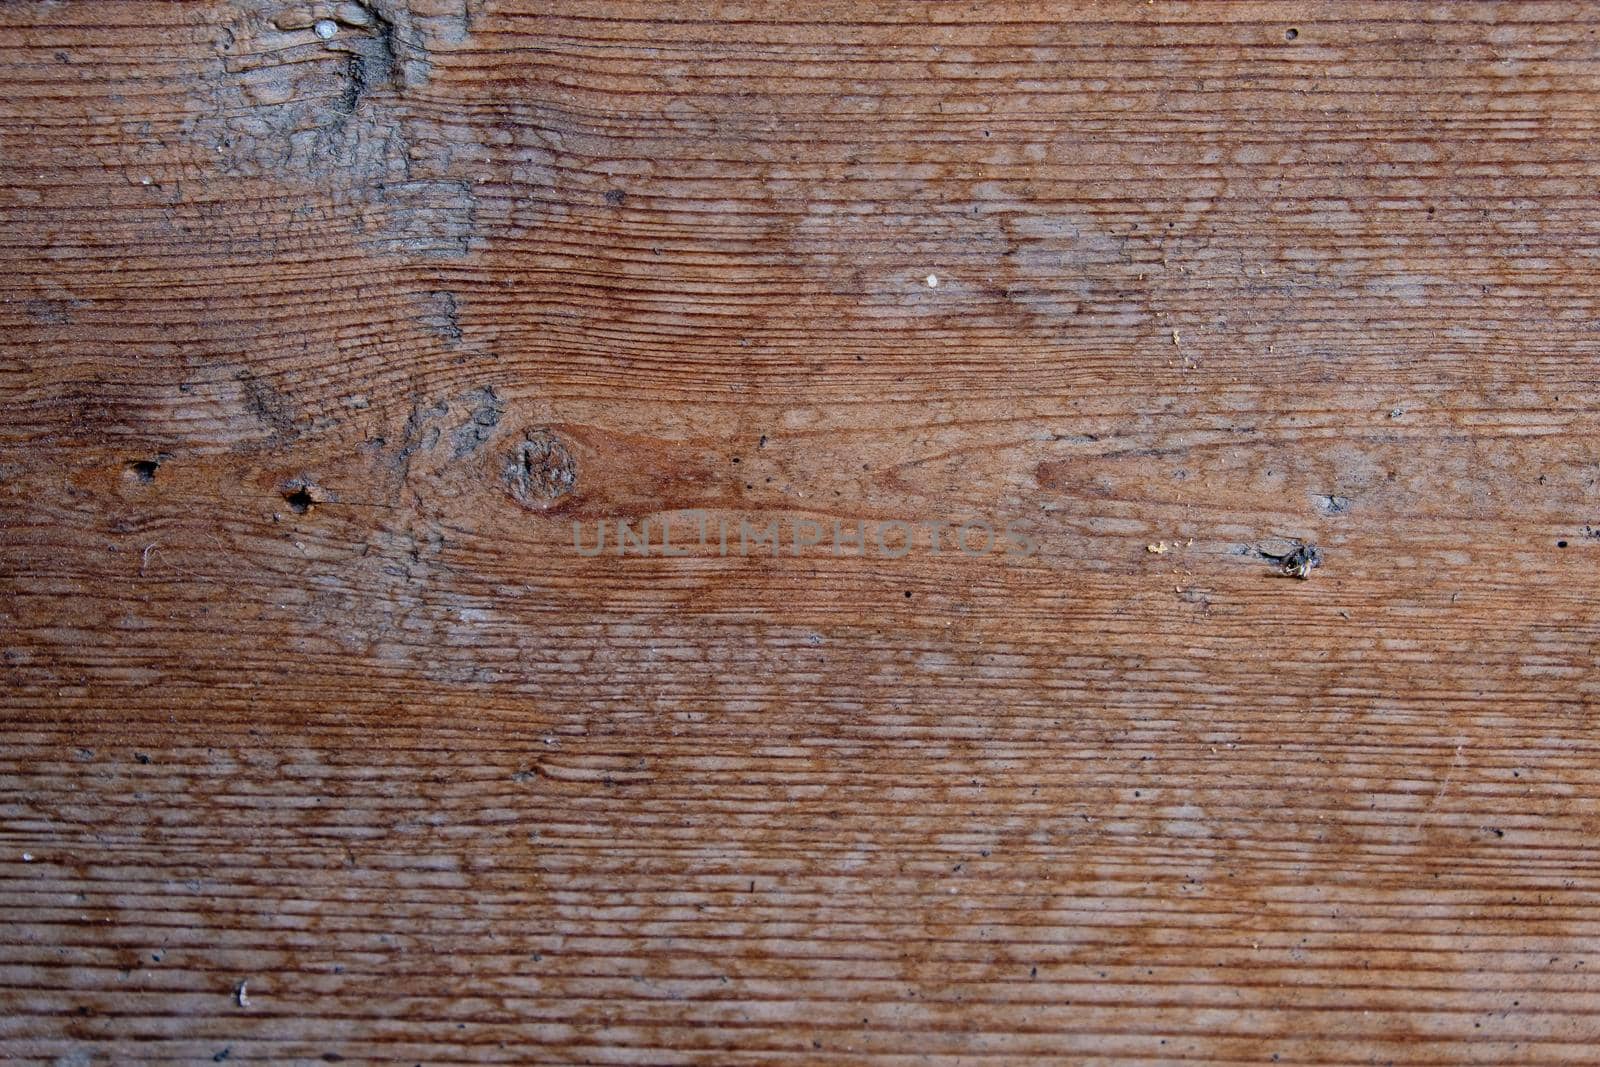 Close up of old wooden boards. Textured background.